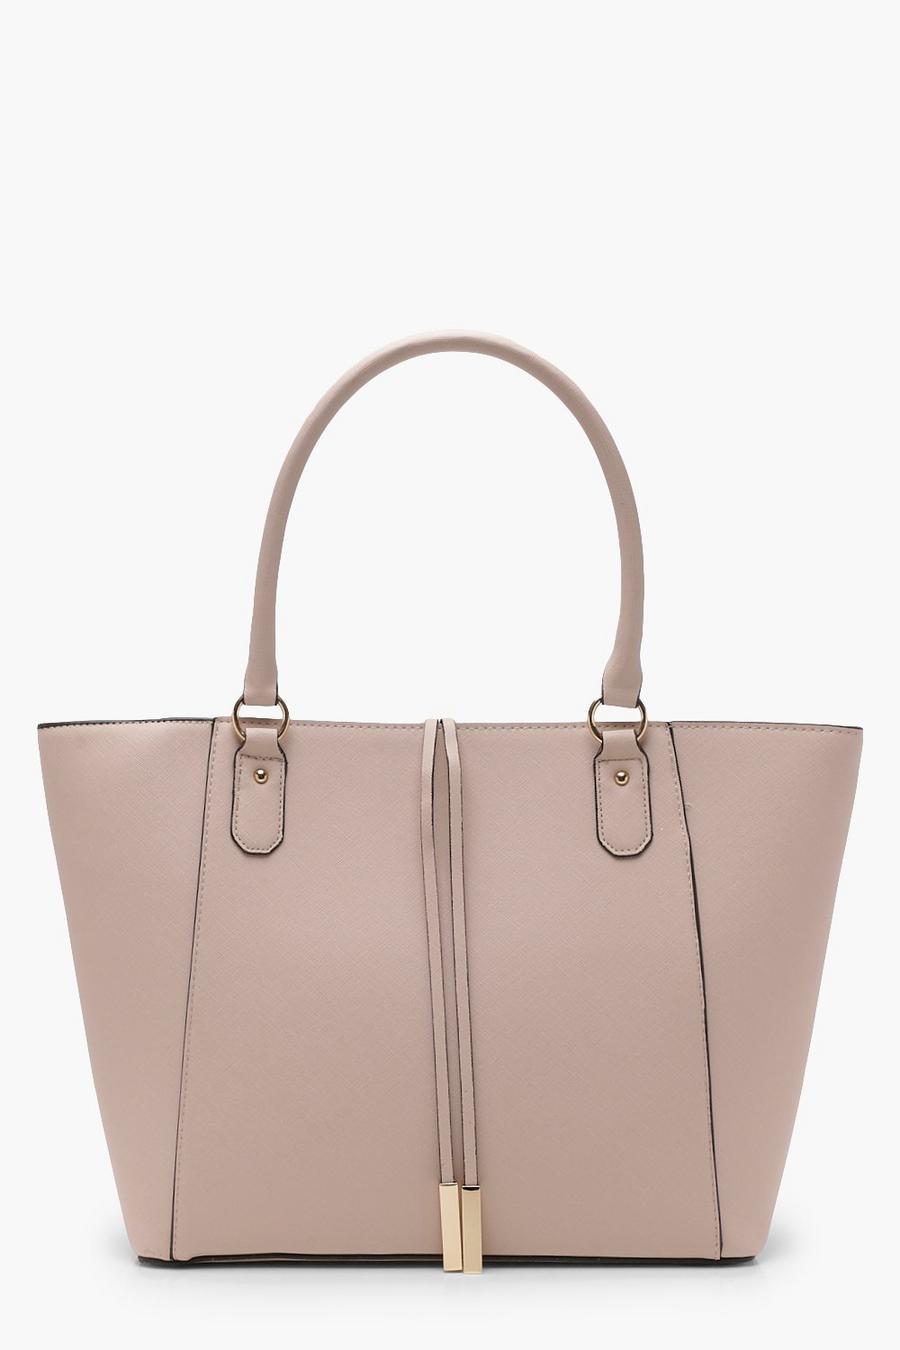 Blush pink Structured Cross Hatch Tote Bag